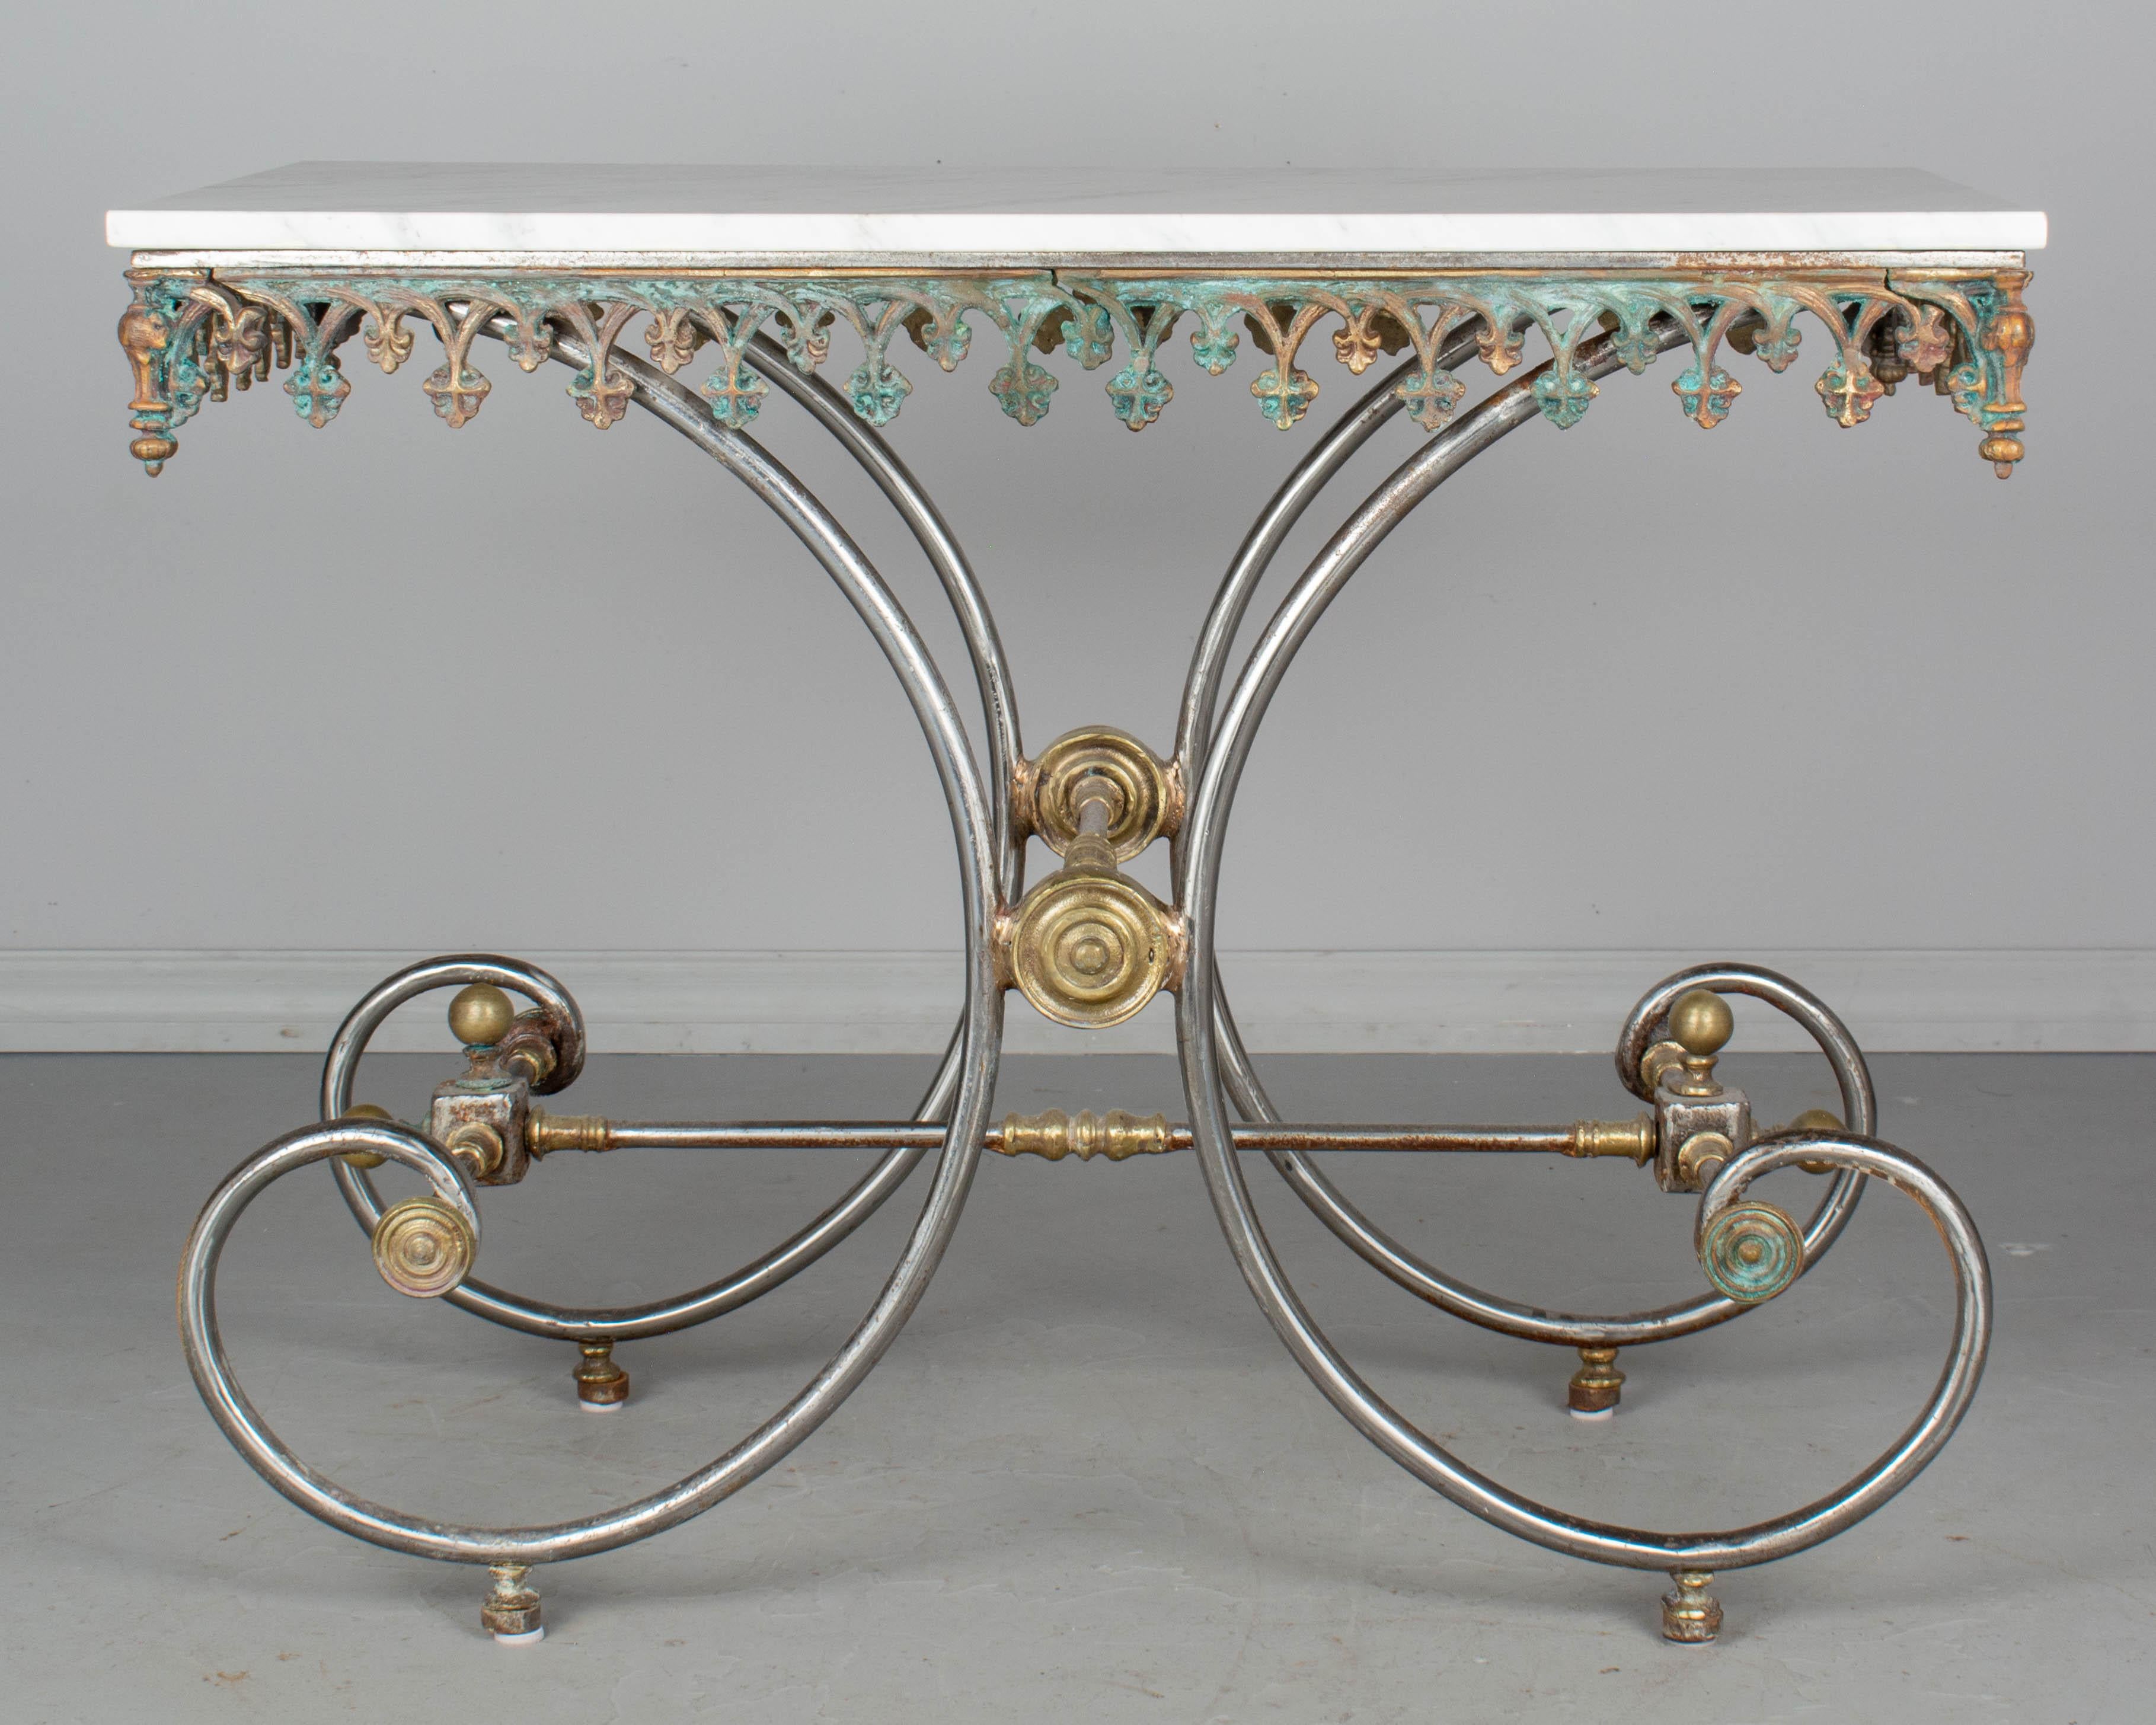 french pastry table with marble top